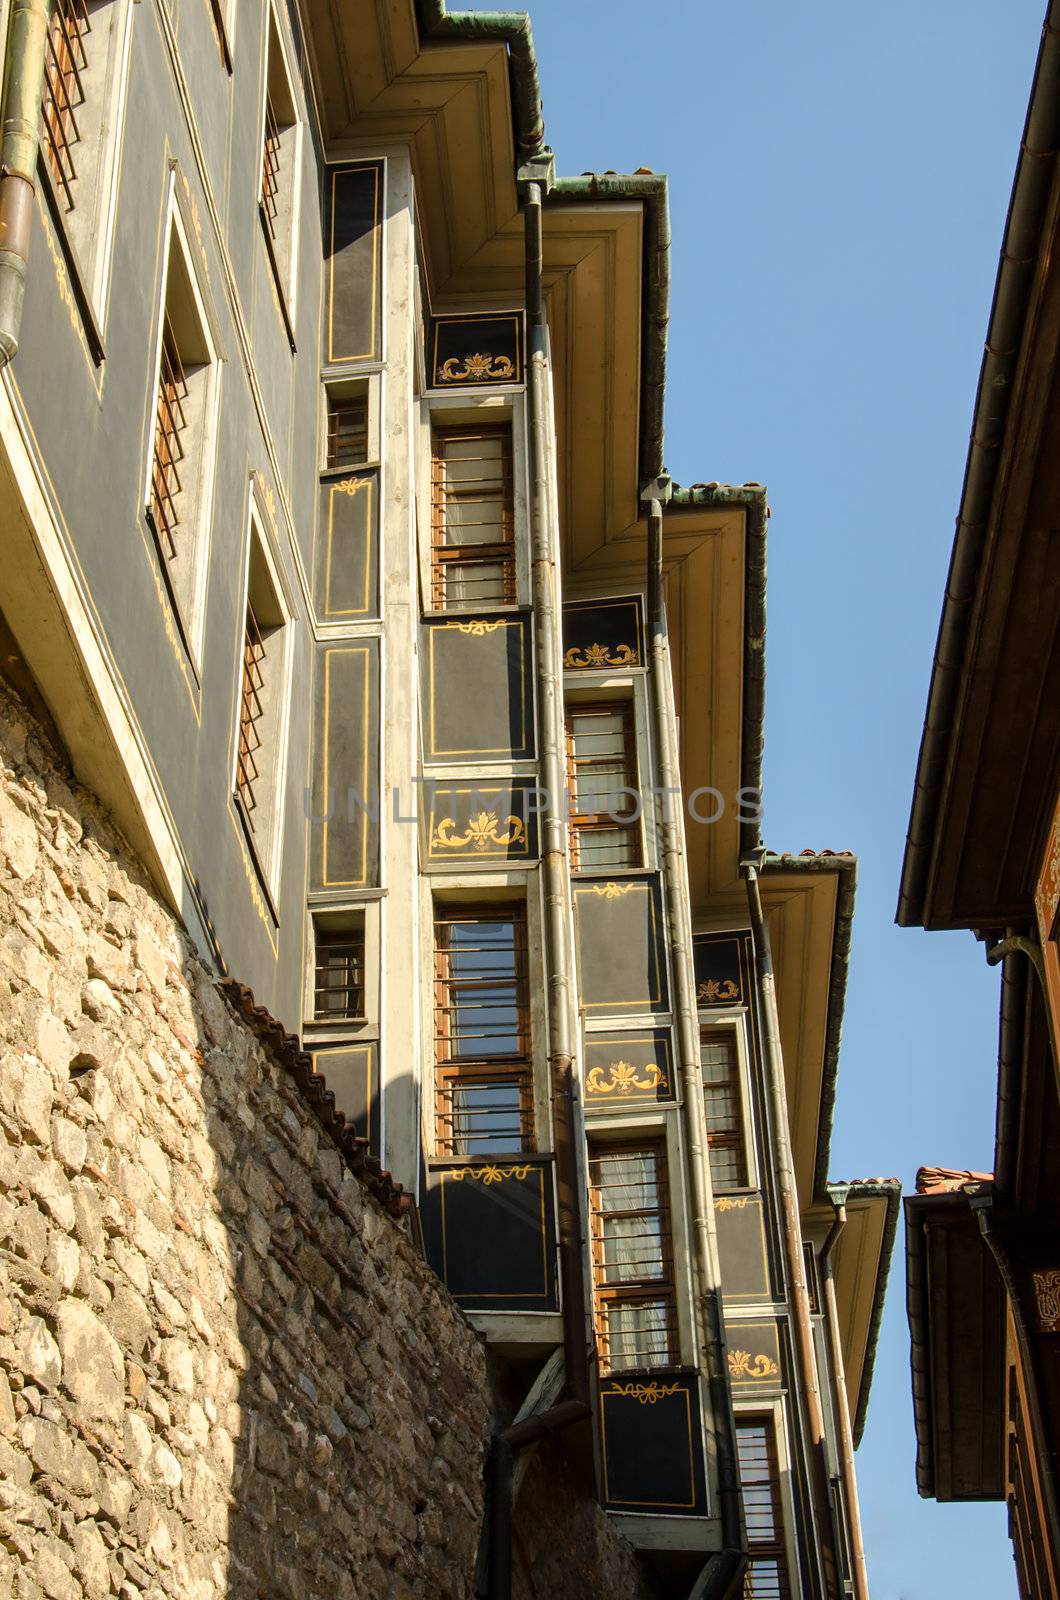 The Ancient Plovdiv is a part of UNESCO World Heritage